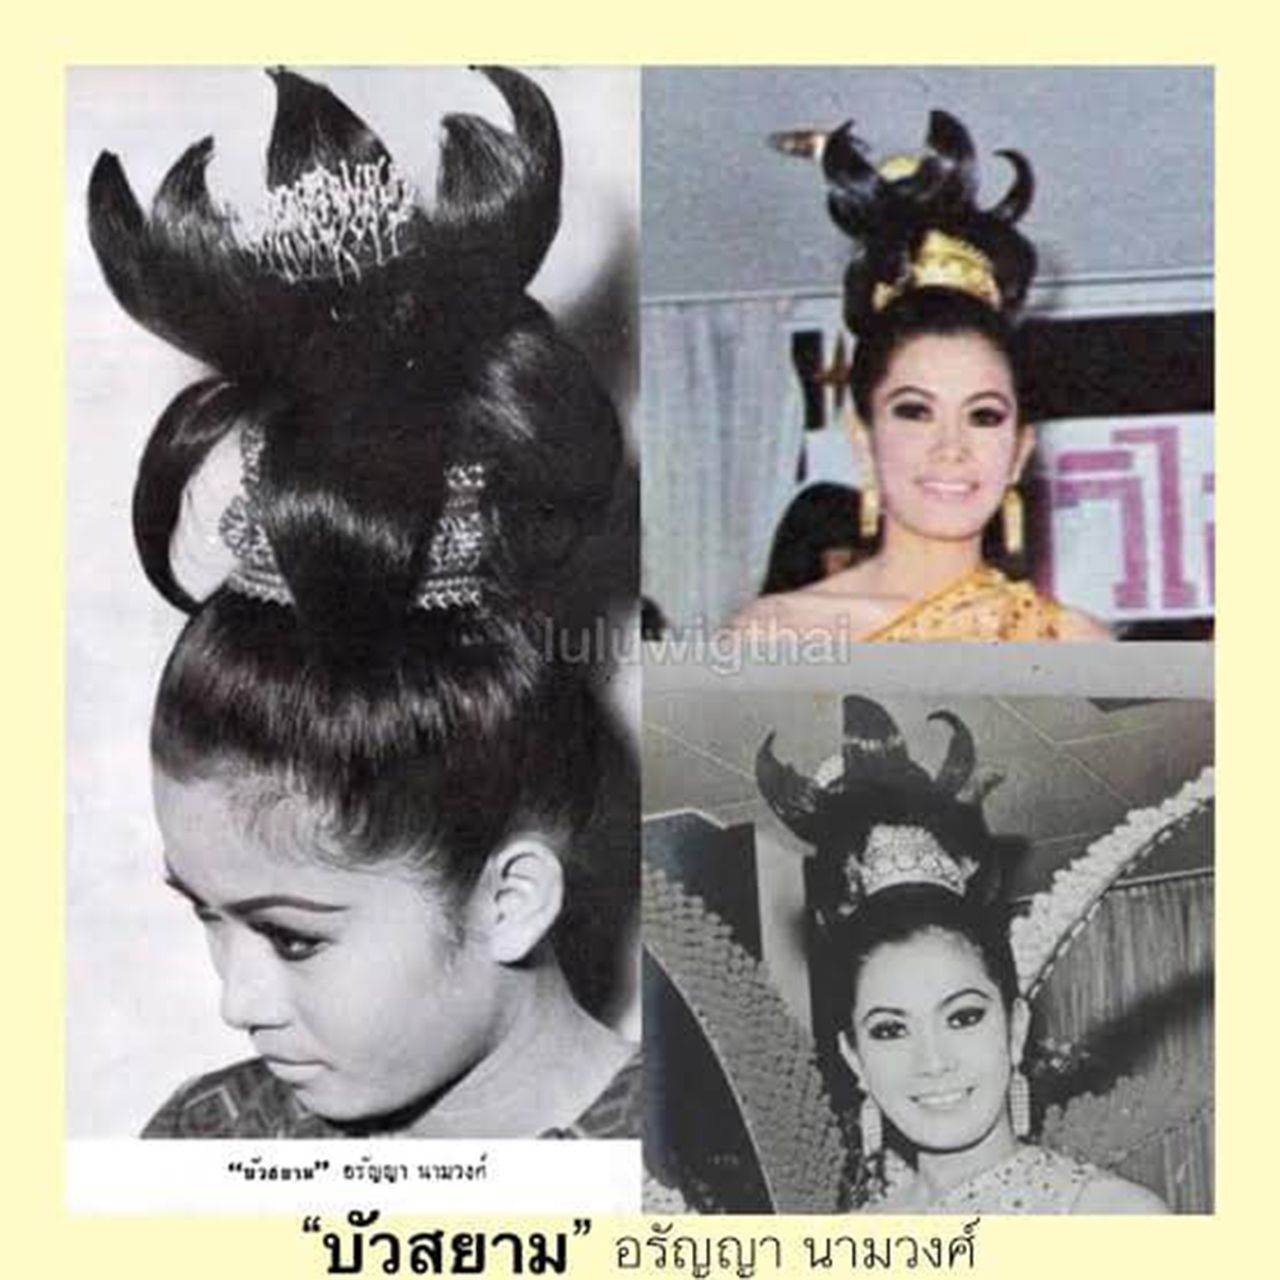 Gorgeous of 70's Hairstyle and Thai Dress in Loy Krathong Festival | THAILAND 🇹🇭